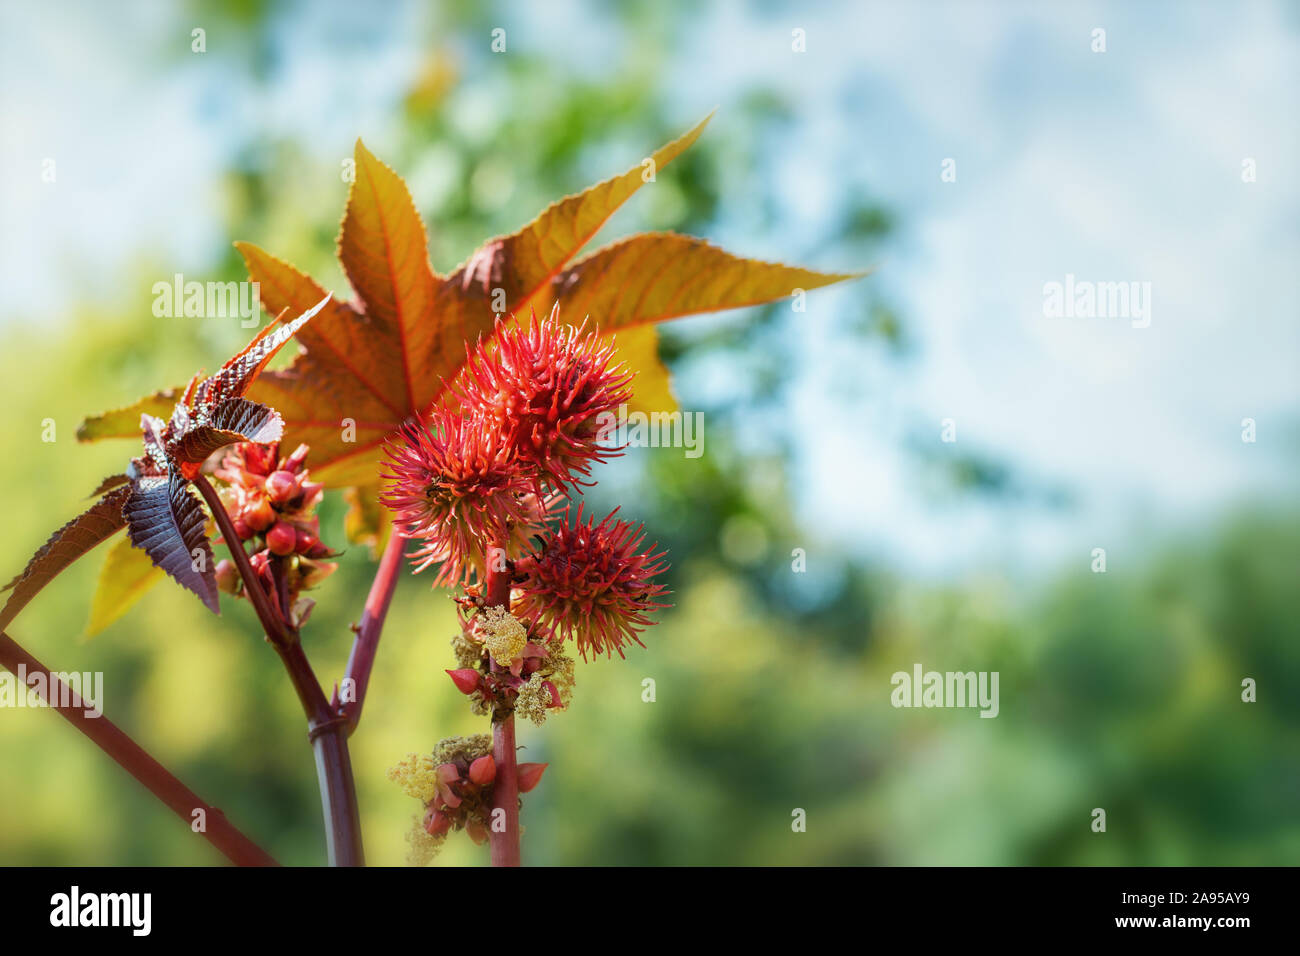 Ricinus communis, red spiny fruits and large carved leaves, close-up bokeh background. Ricinus plant source of Oleum Ricini. Oilseed, medicinal, healt Stock Photo